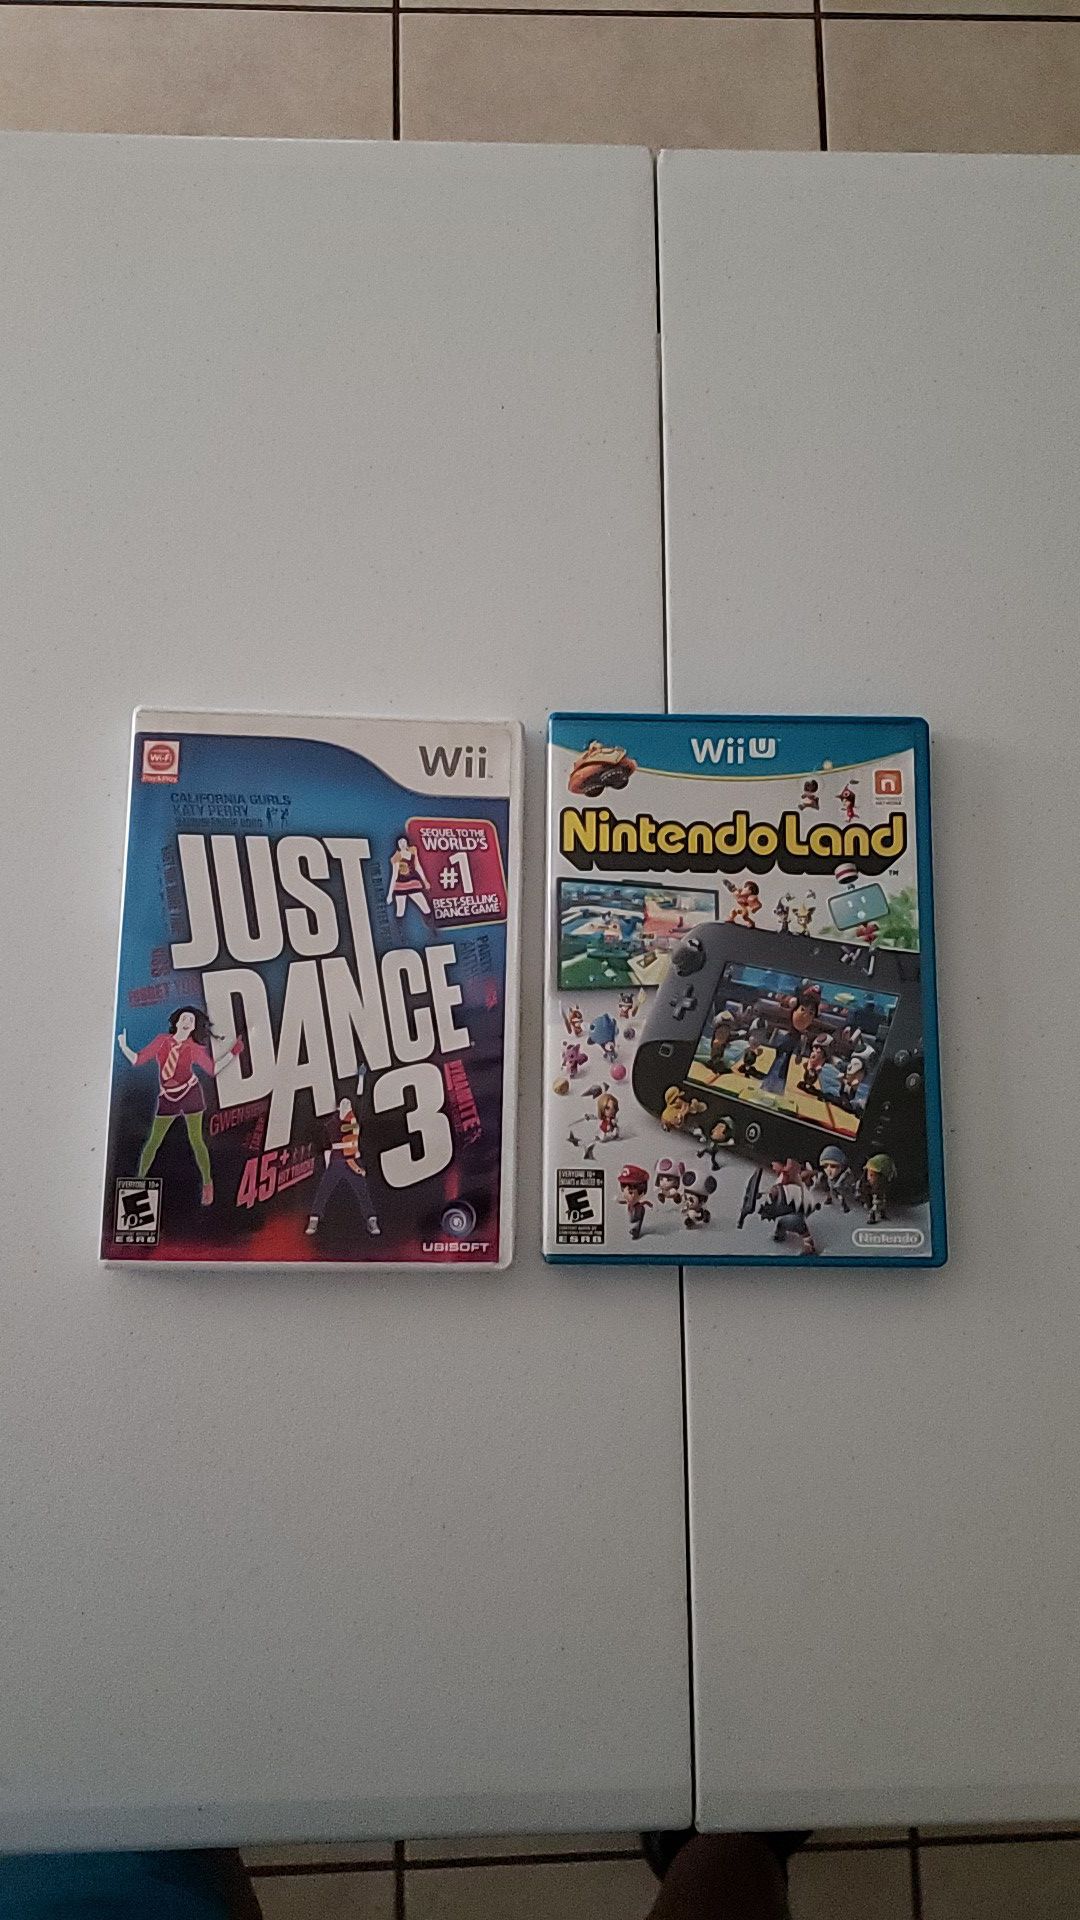 Just dance 3 and Nintendo land